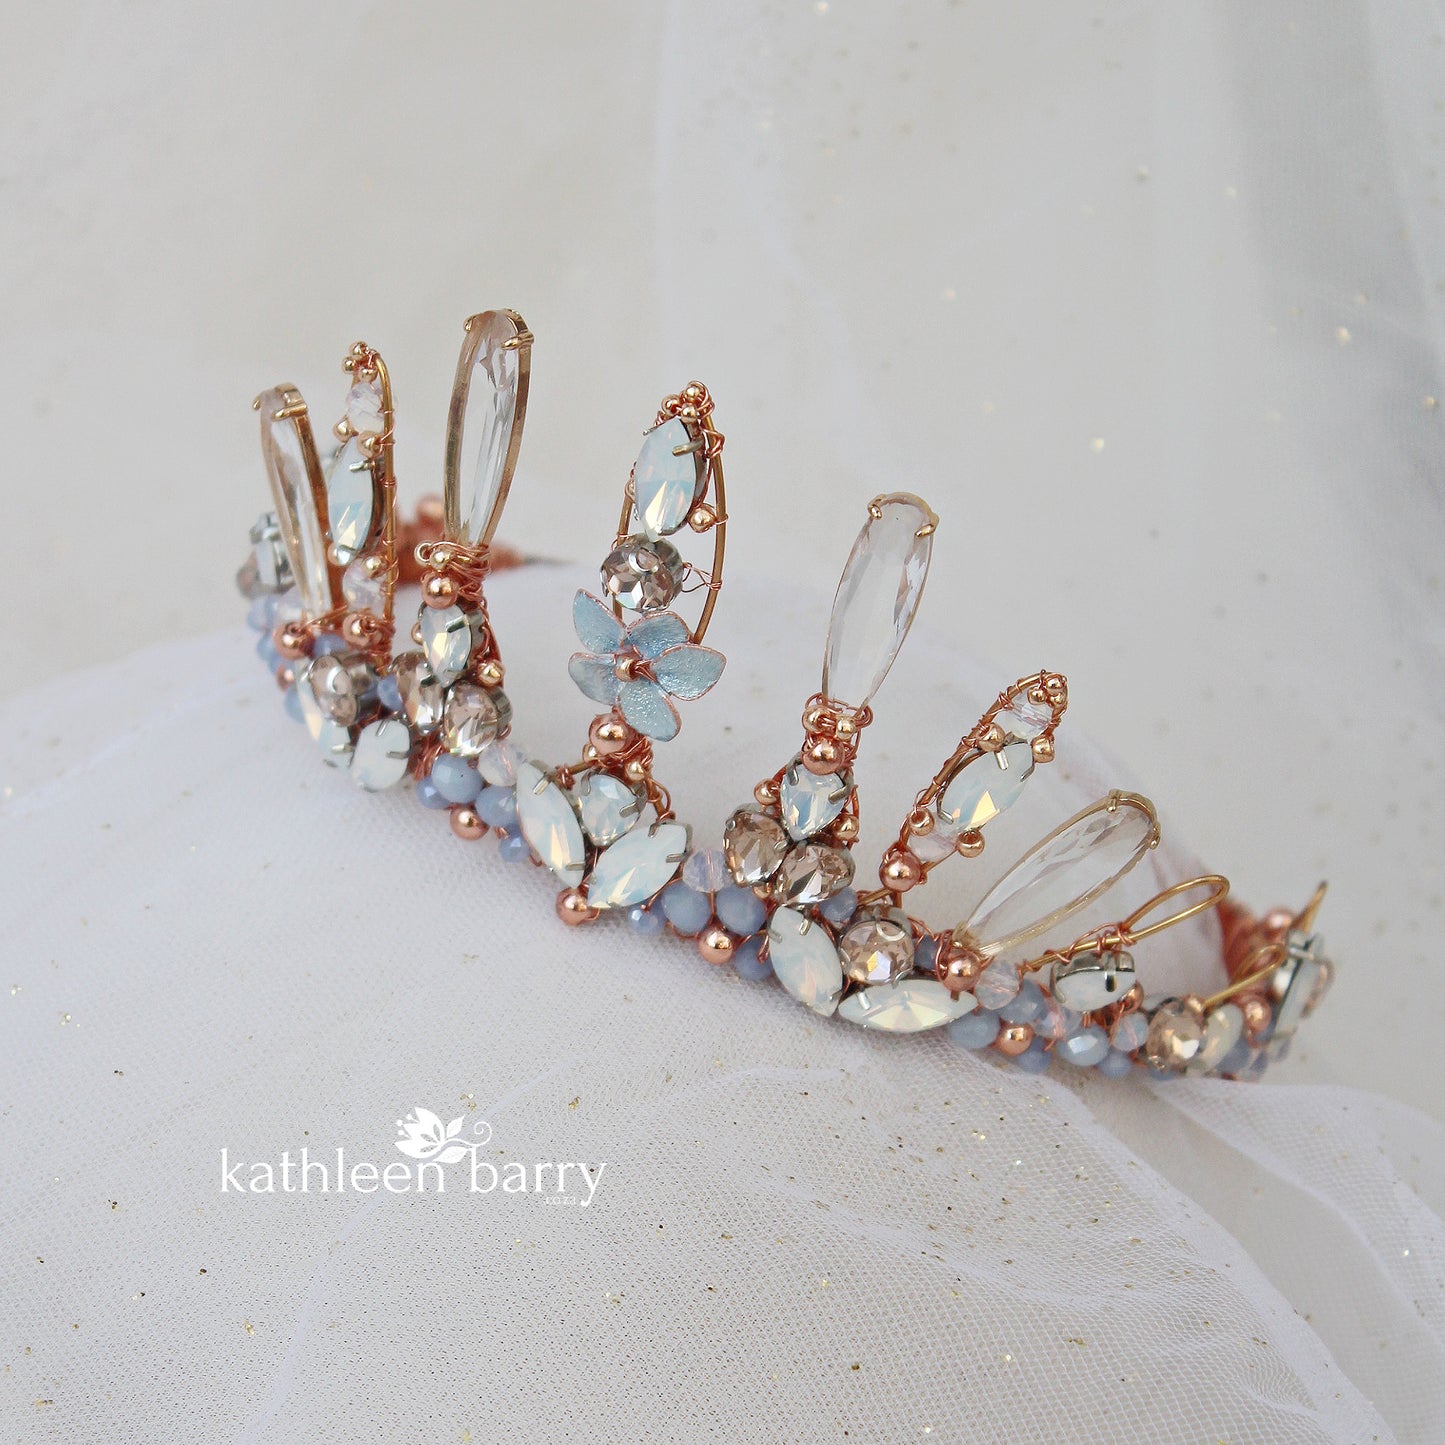 Paige Tiara style bridal crown rose gold and pale opal blue - wedding hair accessories - custom colors to order